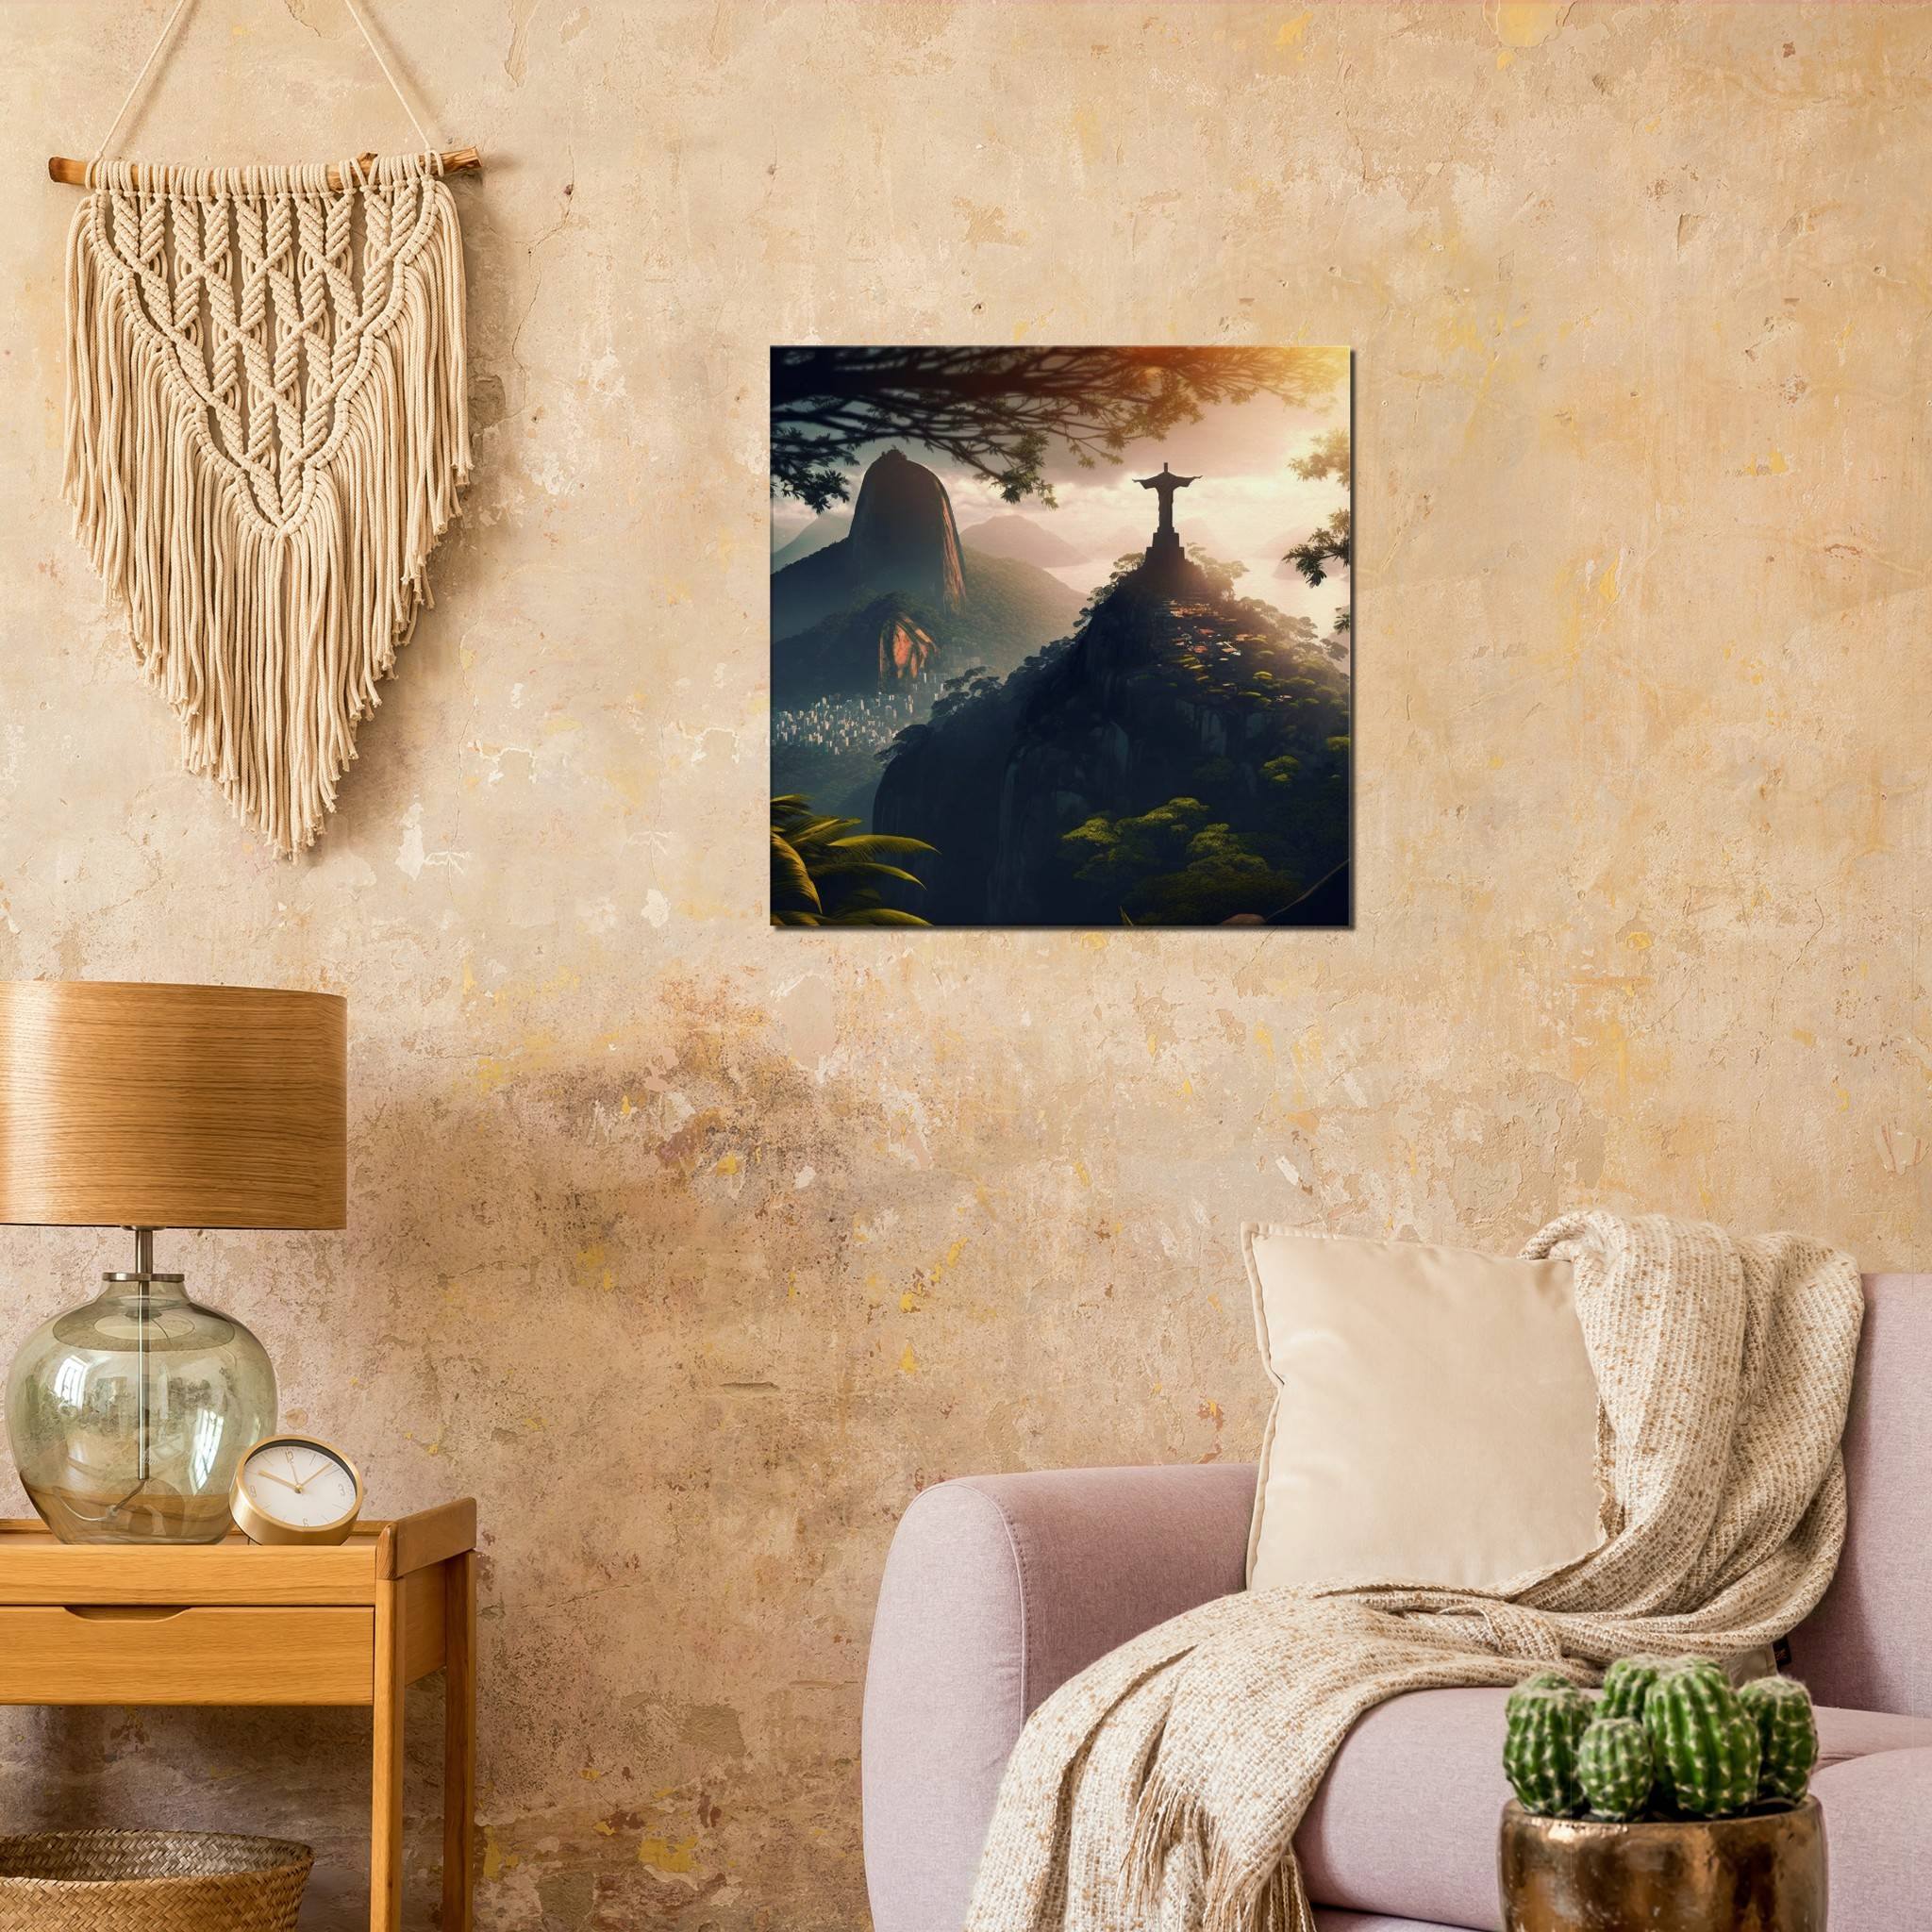 Christ the Redeemer 10 / 60 x 60cm (Canvas Print) Canvas Print Canvas reproduction The Pianist Print On Demand Fabled Gallery https://fabledgallery.art/product/christ-the-redeener-10-60-x-60cm-canvas-print/